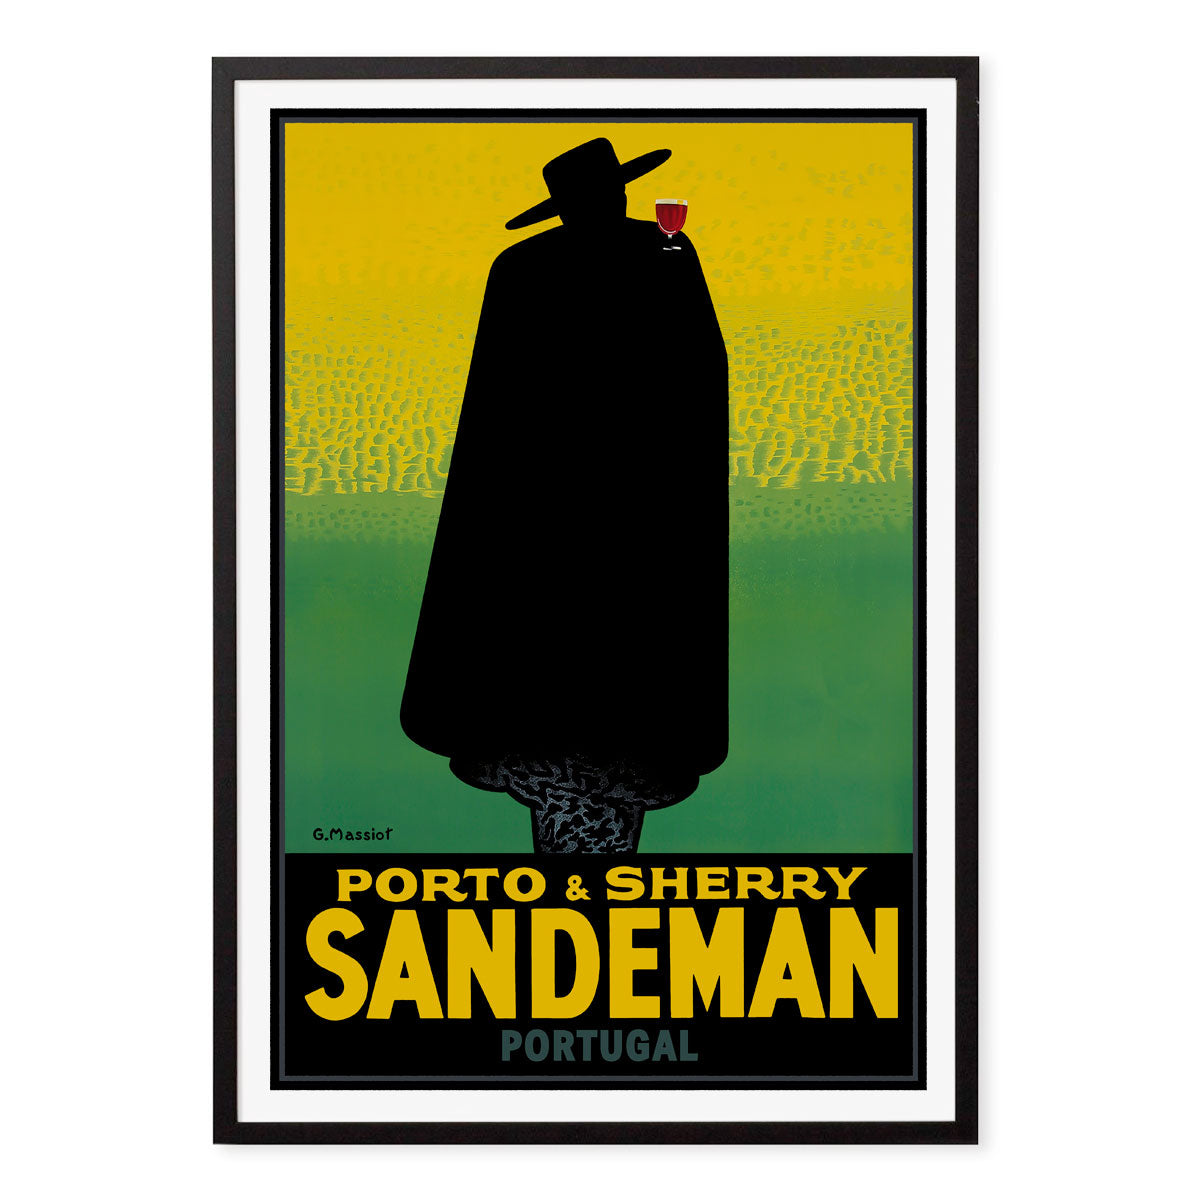 Sandeman Portuguese vintage retro poster in black frame from Places We Luv